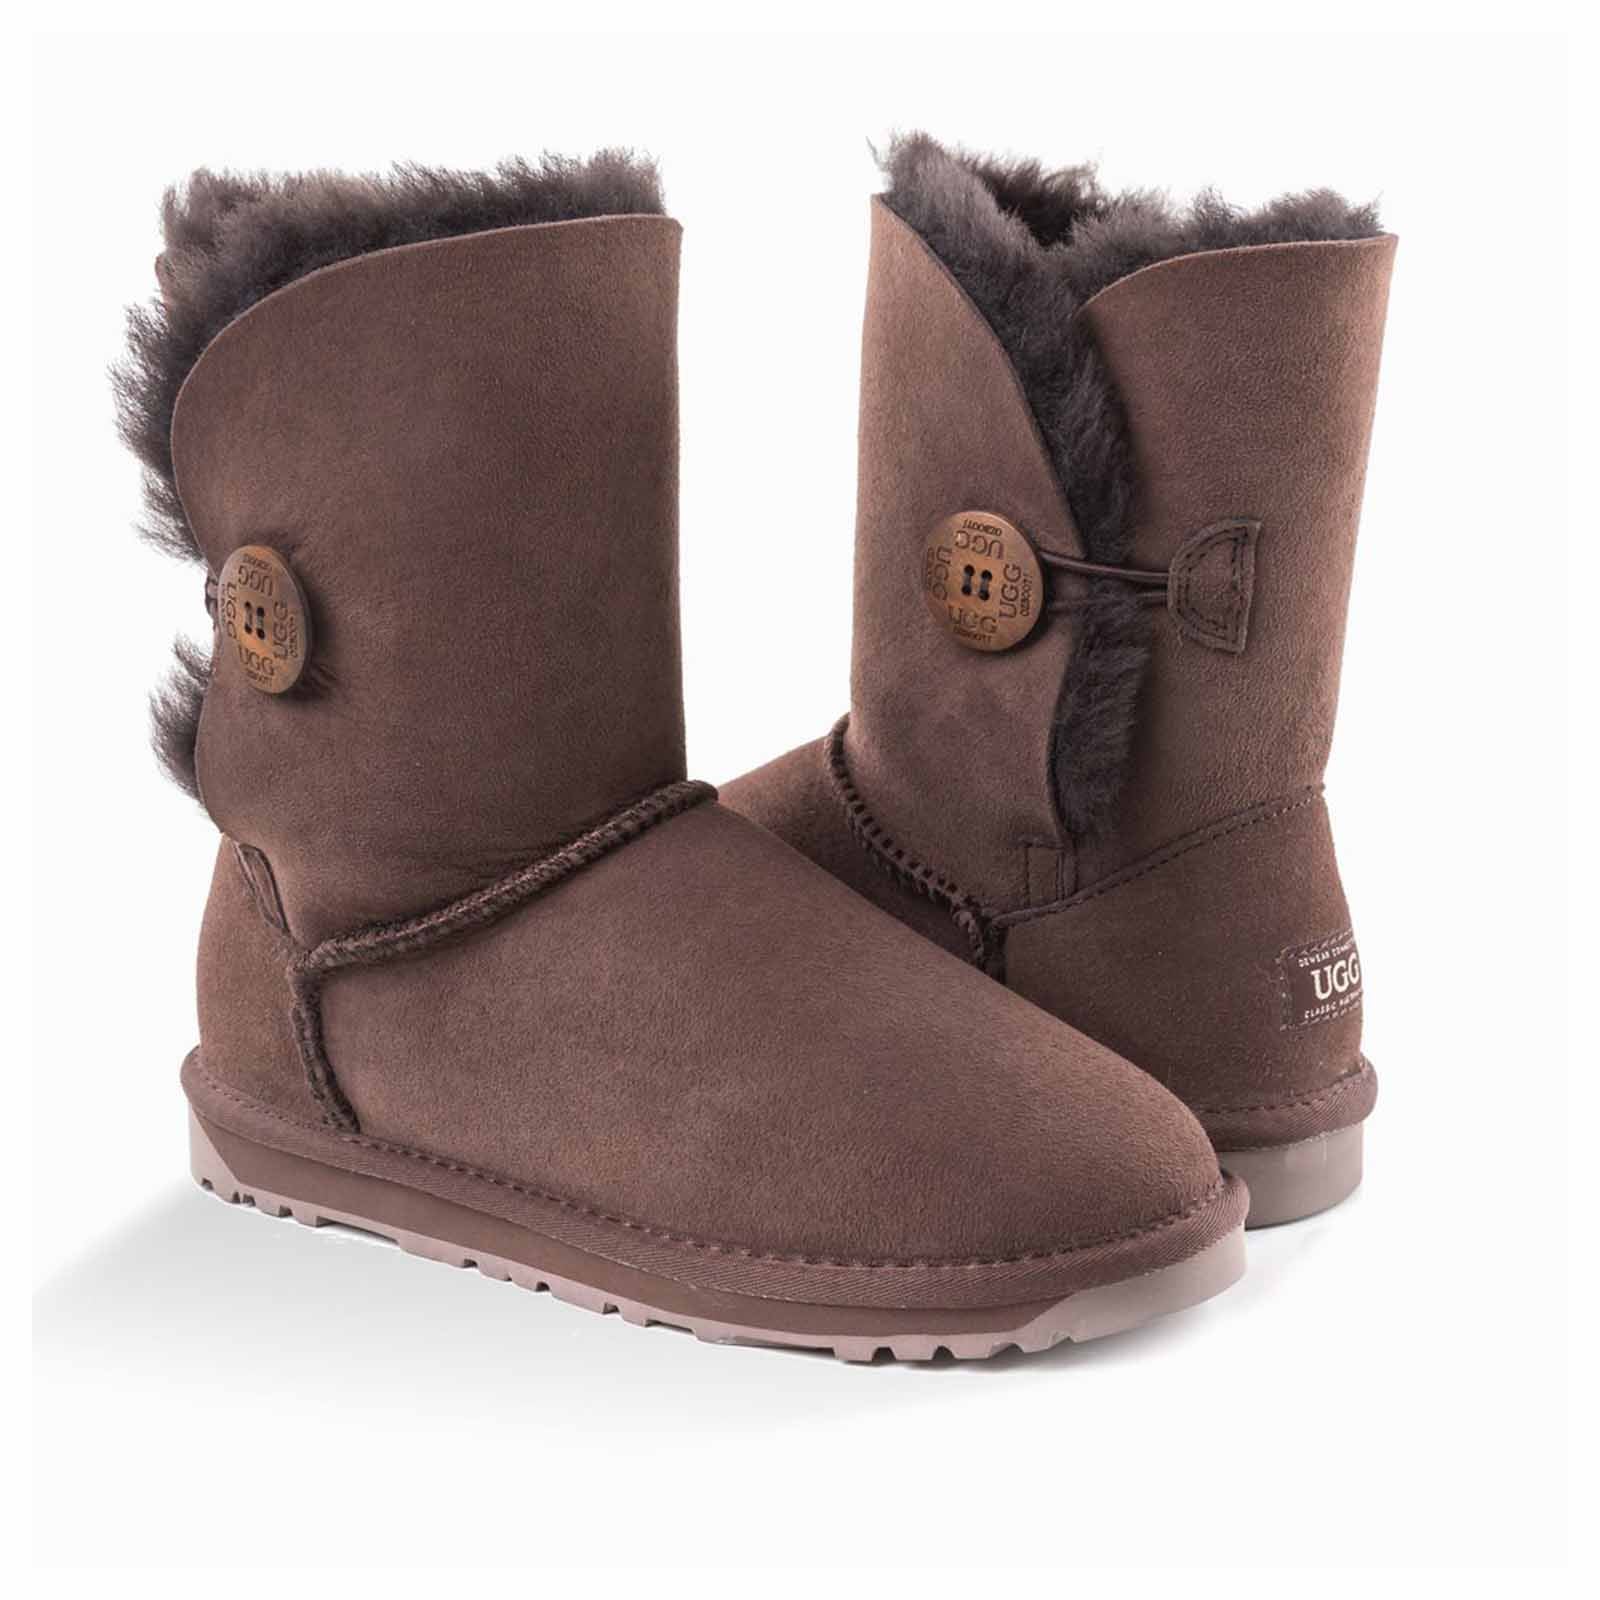 Ozwear UGG Boots Classic Short Button Chocolate